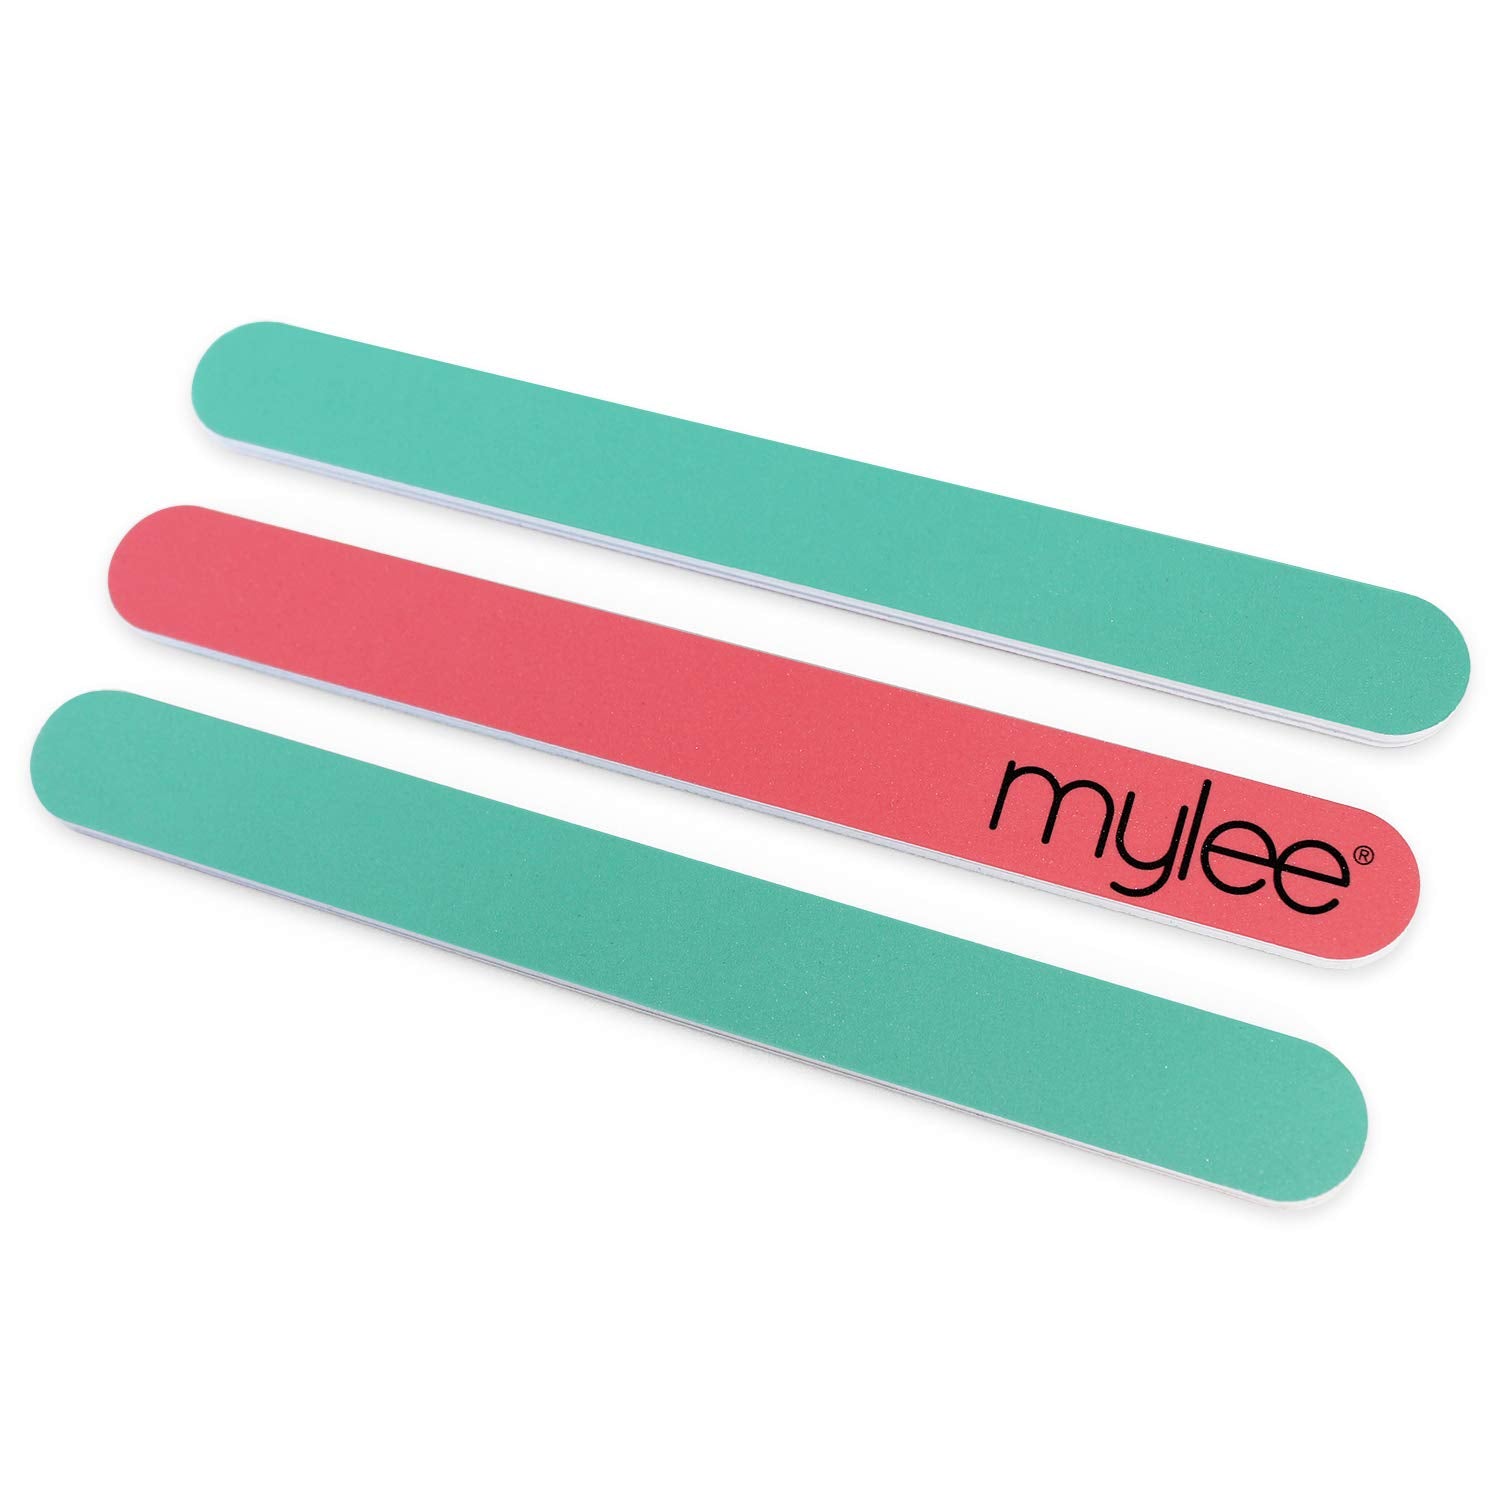 Mylee Double-Sided Nail Files (Pack of 3) – Professional Manicure Prep Tool to Shape and Repair, 180/240 Grit to File and Contour, Suitable for Acrylic, Natural Nails and Gel Polish Removal